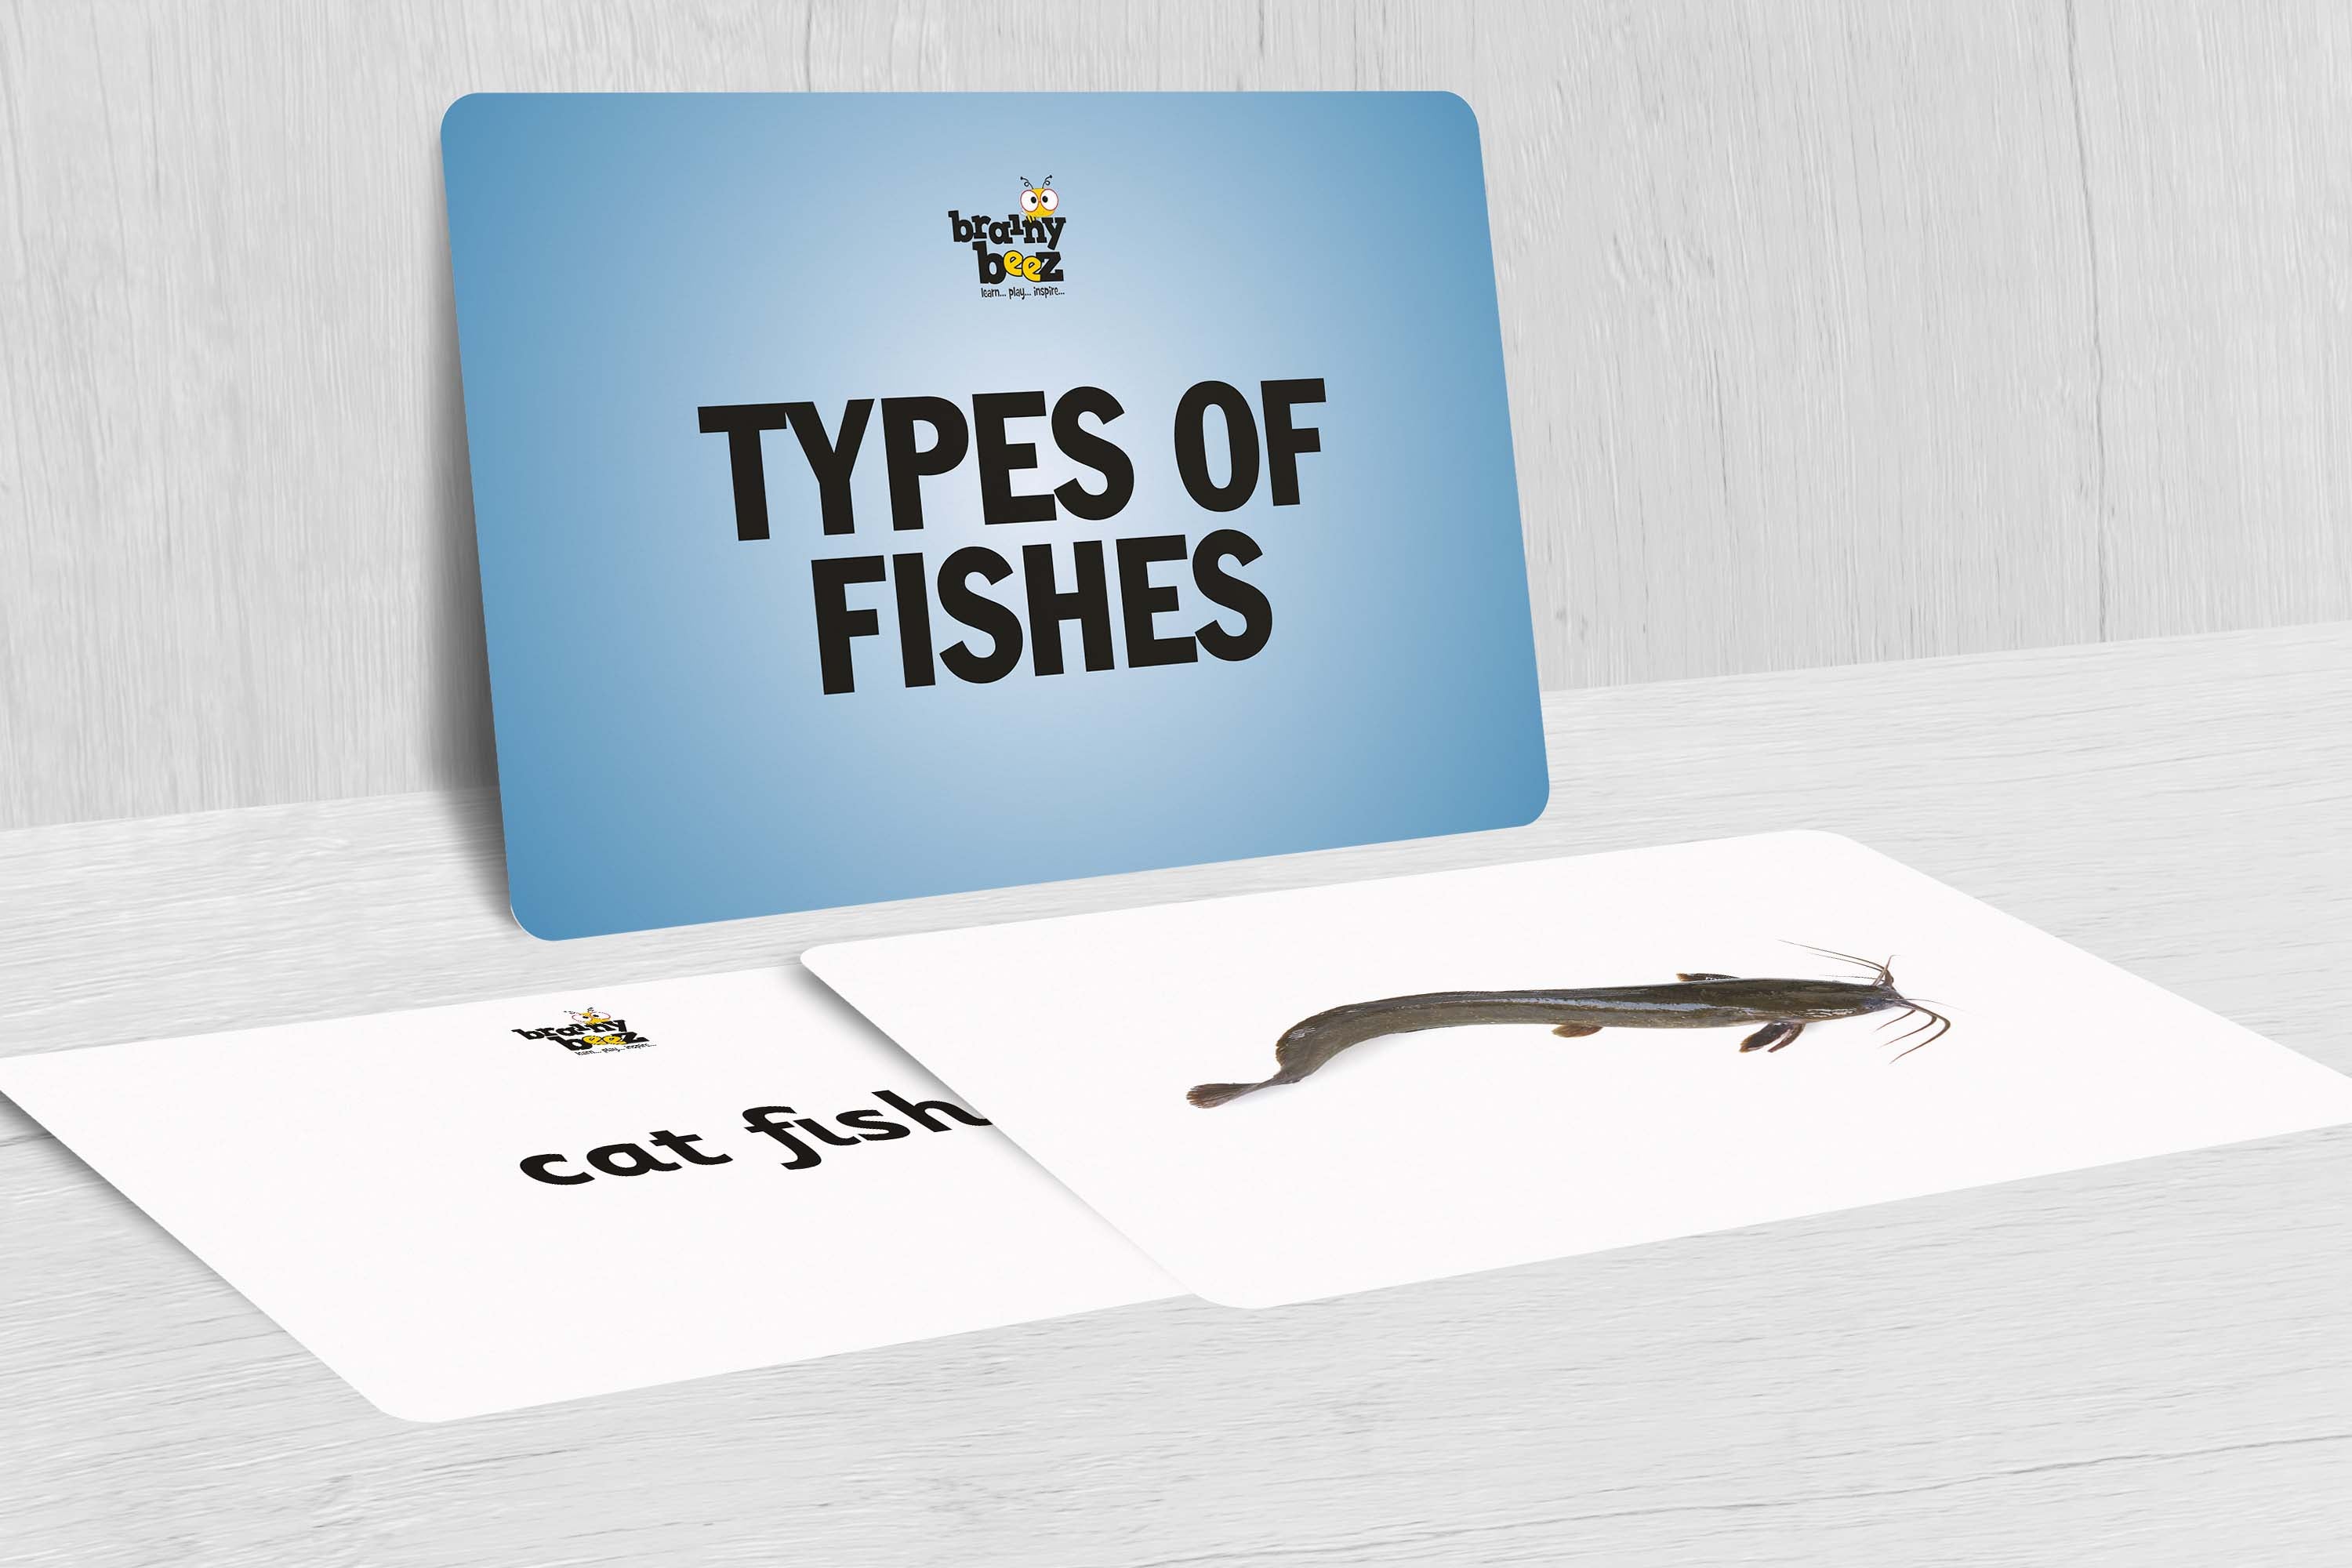 Types of Fishes